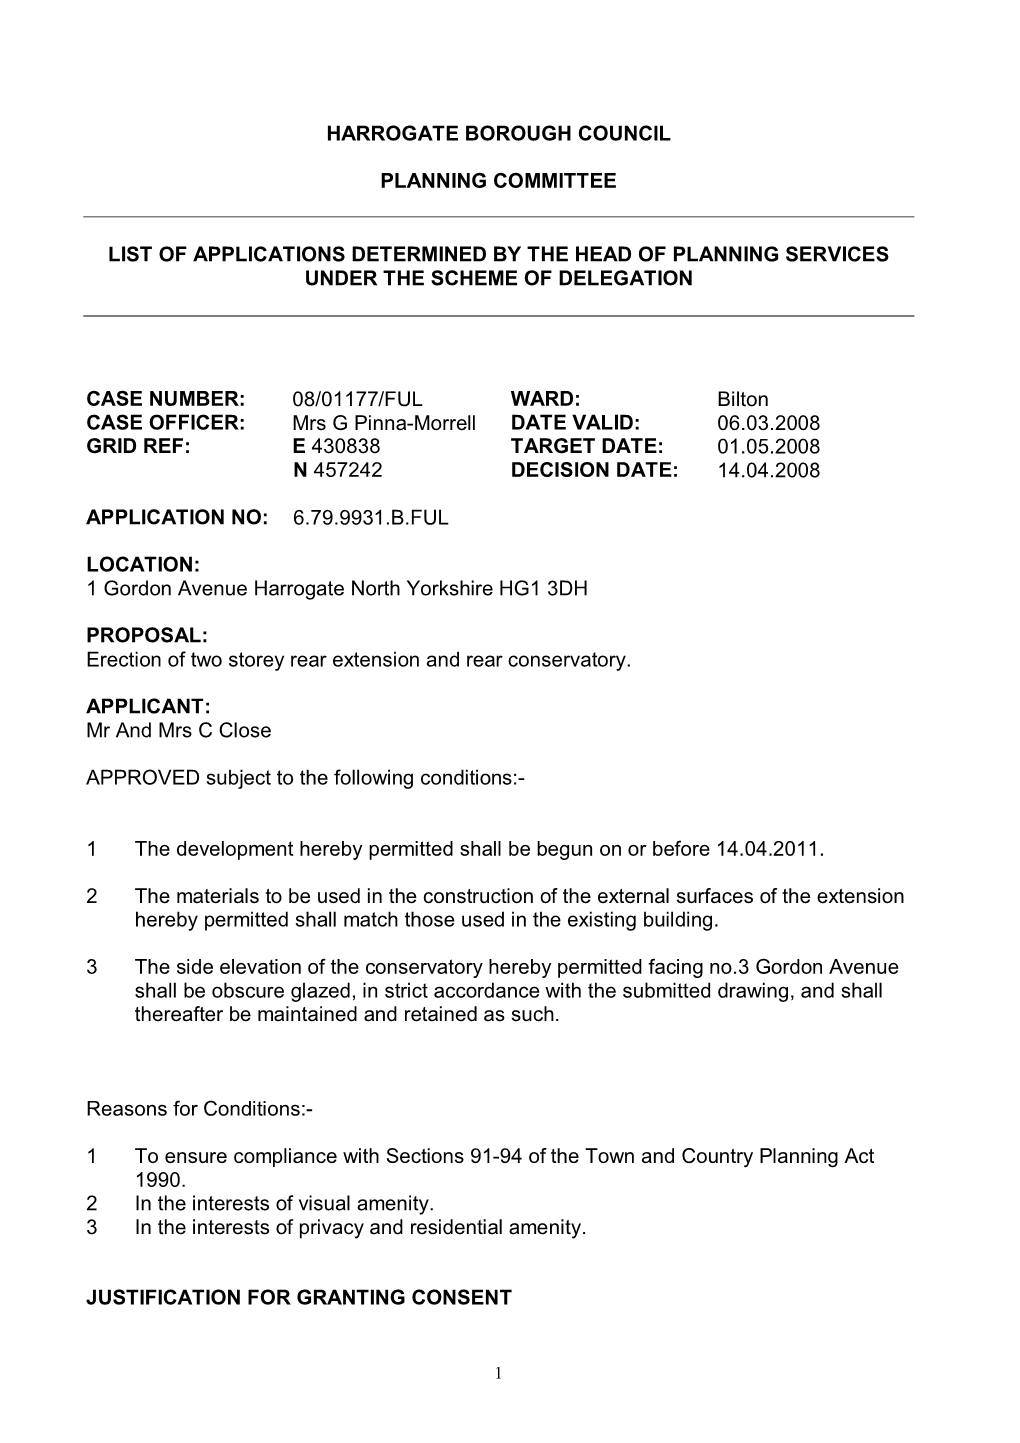 Harrogate Borough Council Planning Committee List of Applications Determined by the Head of Planning Services Under the Scheme O